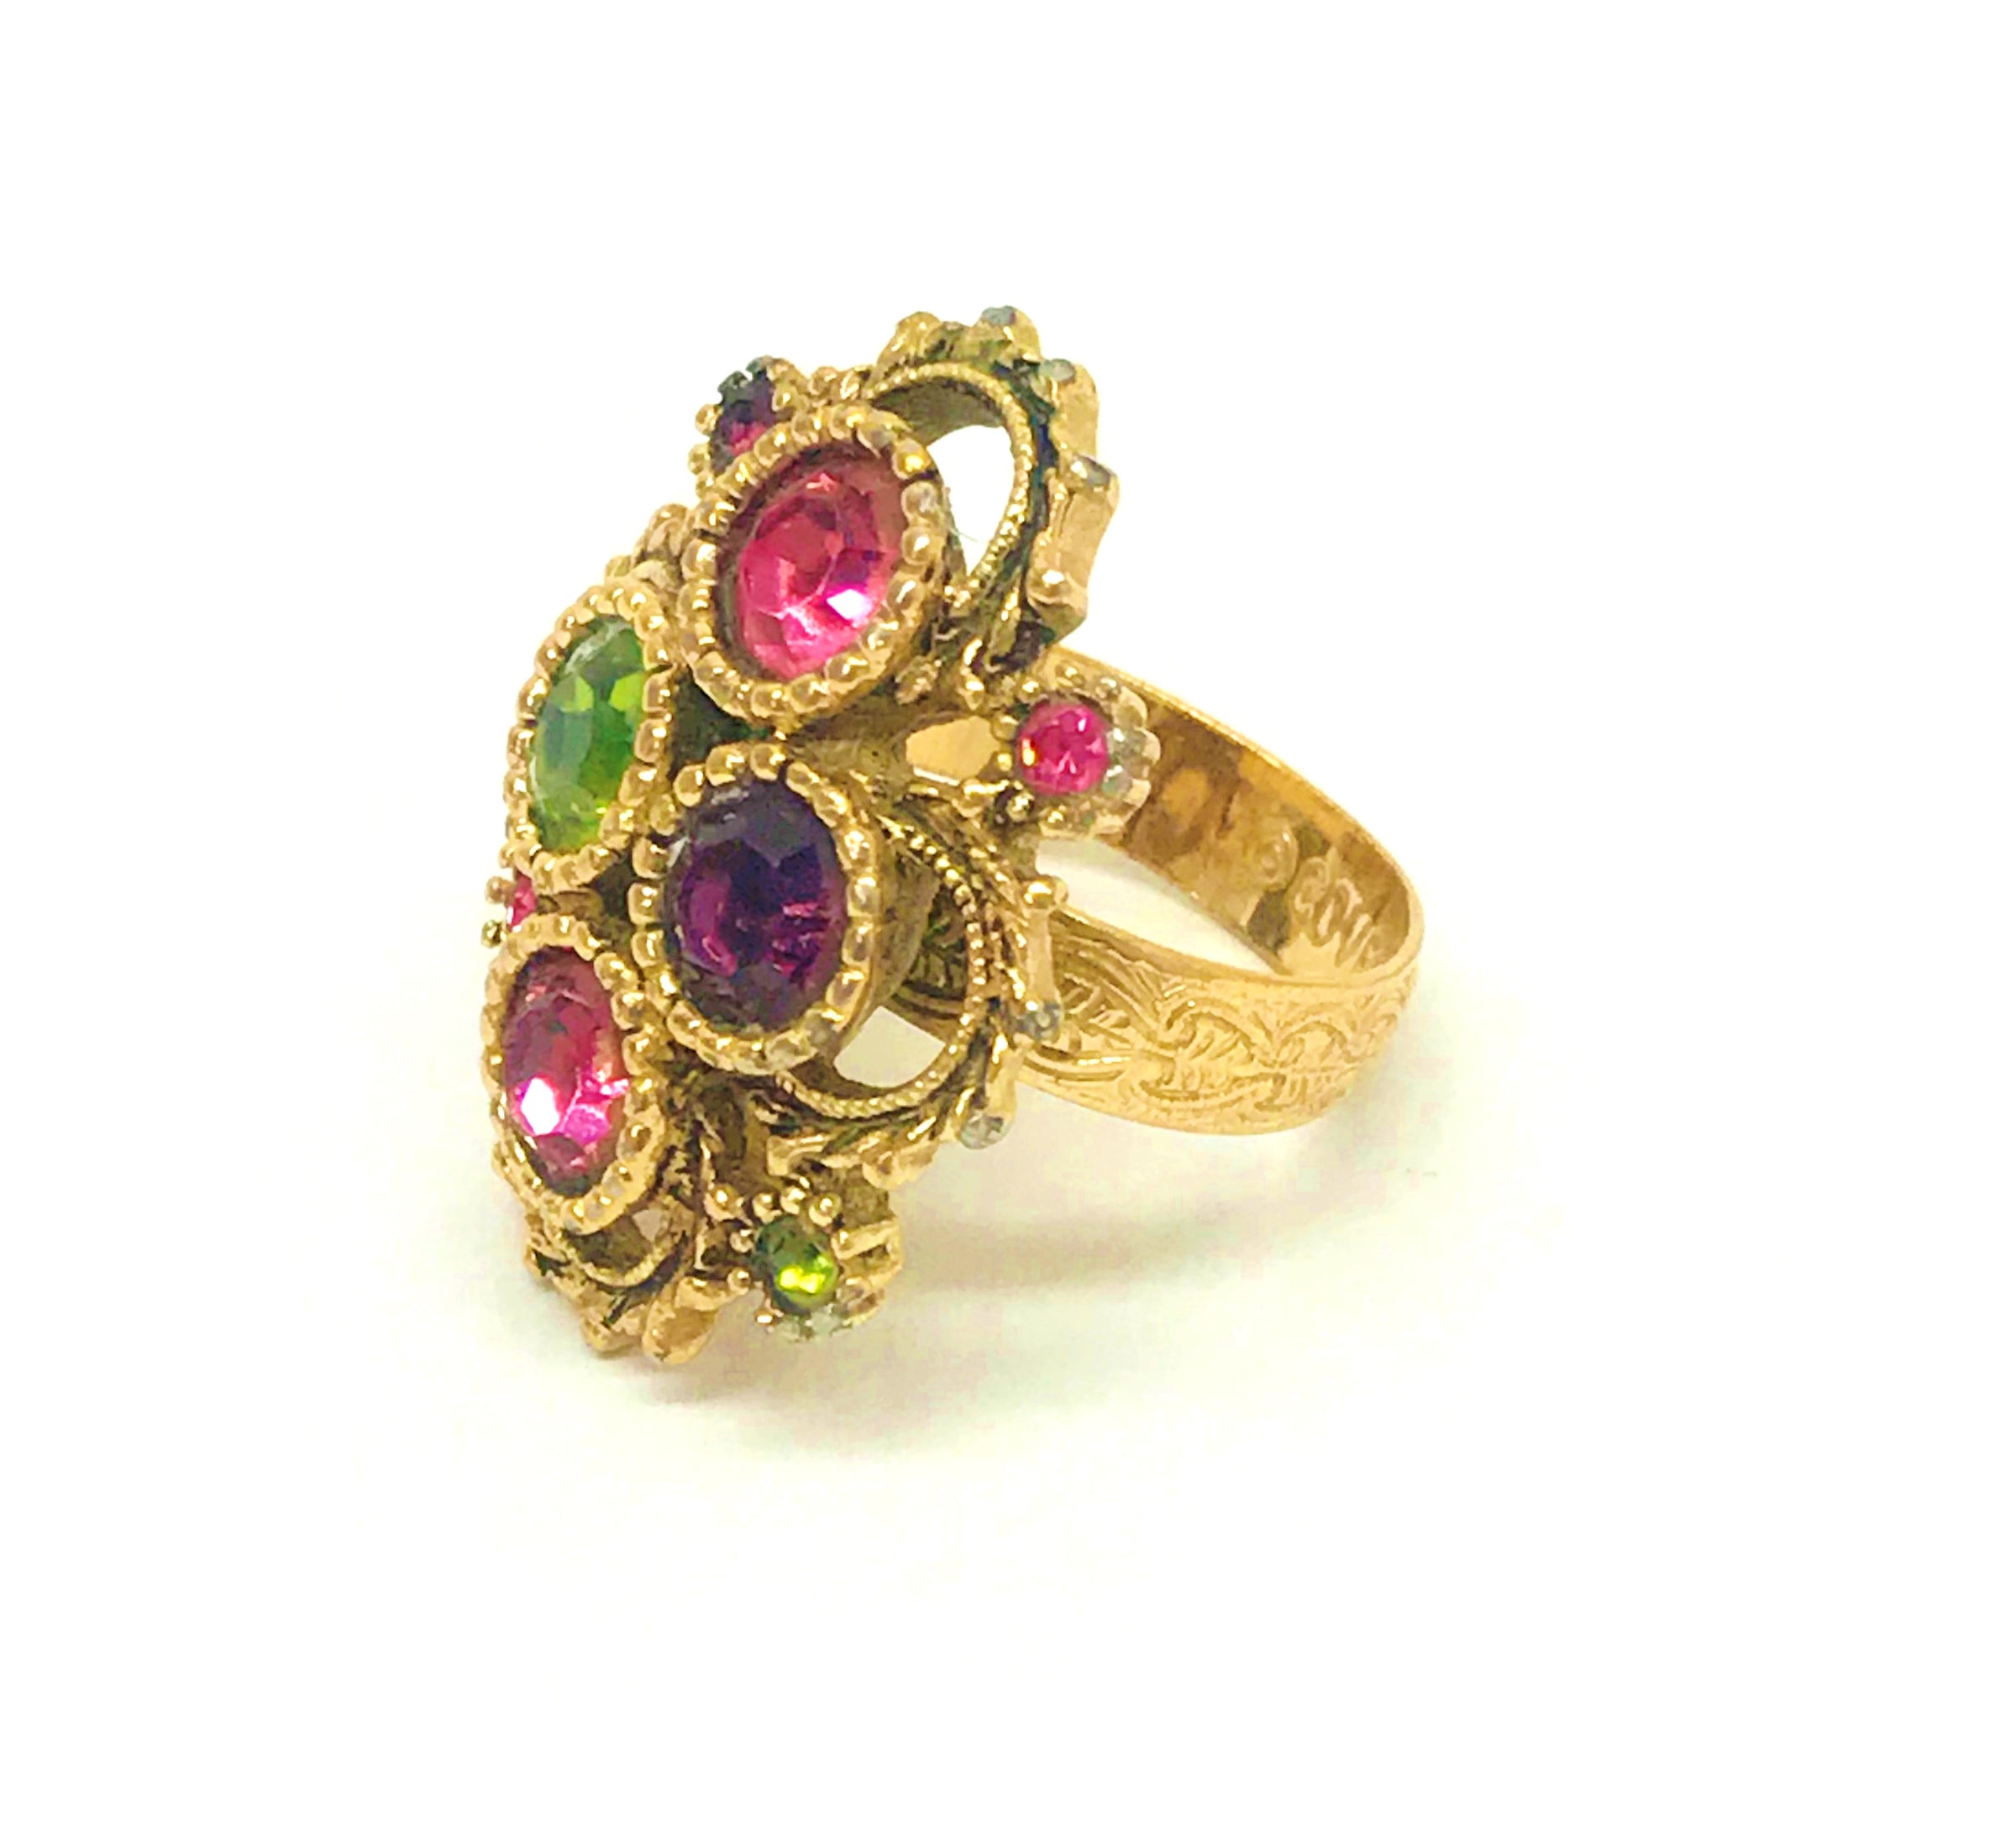 1970's Sarah Coventry Austrian Lites Rhinestone Adjustable Ring - Hers and His Treasures